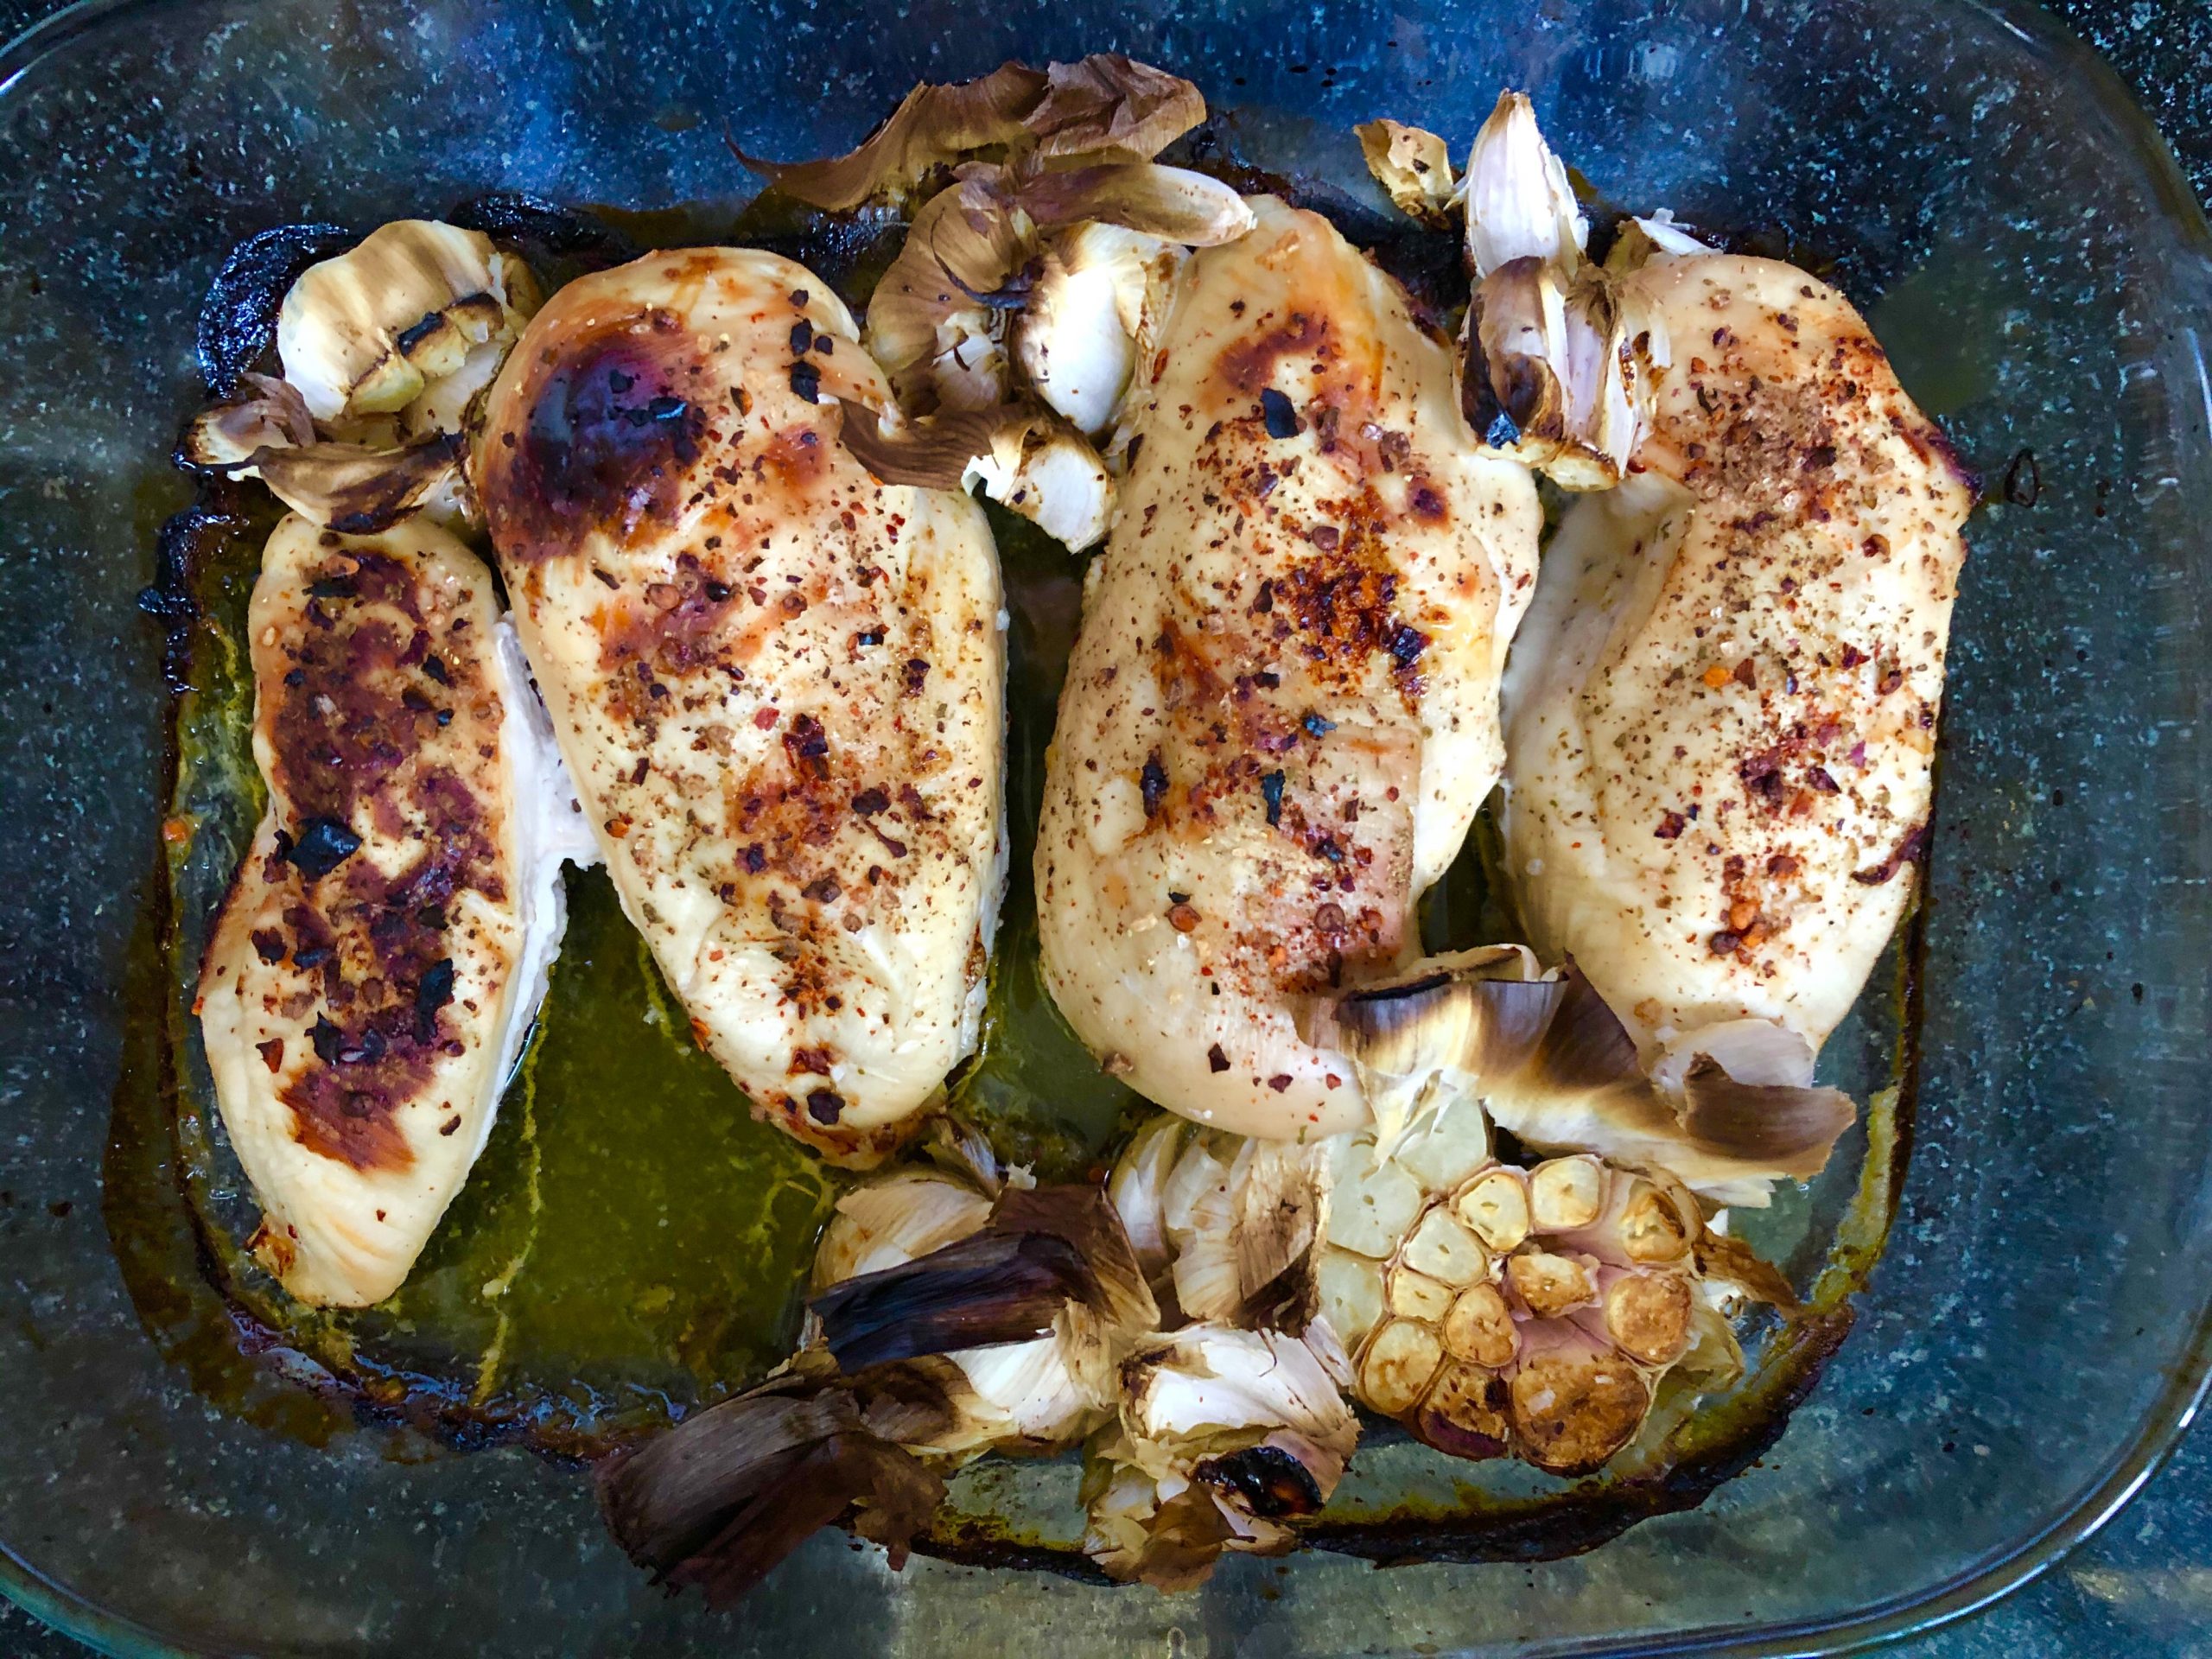 Grilled Chicken Breast with Chili Flakes and Garlic